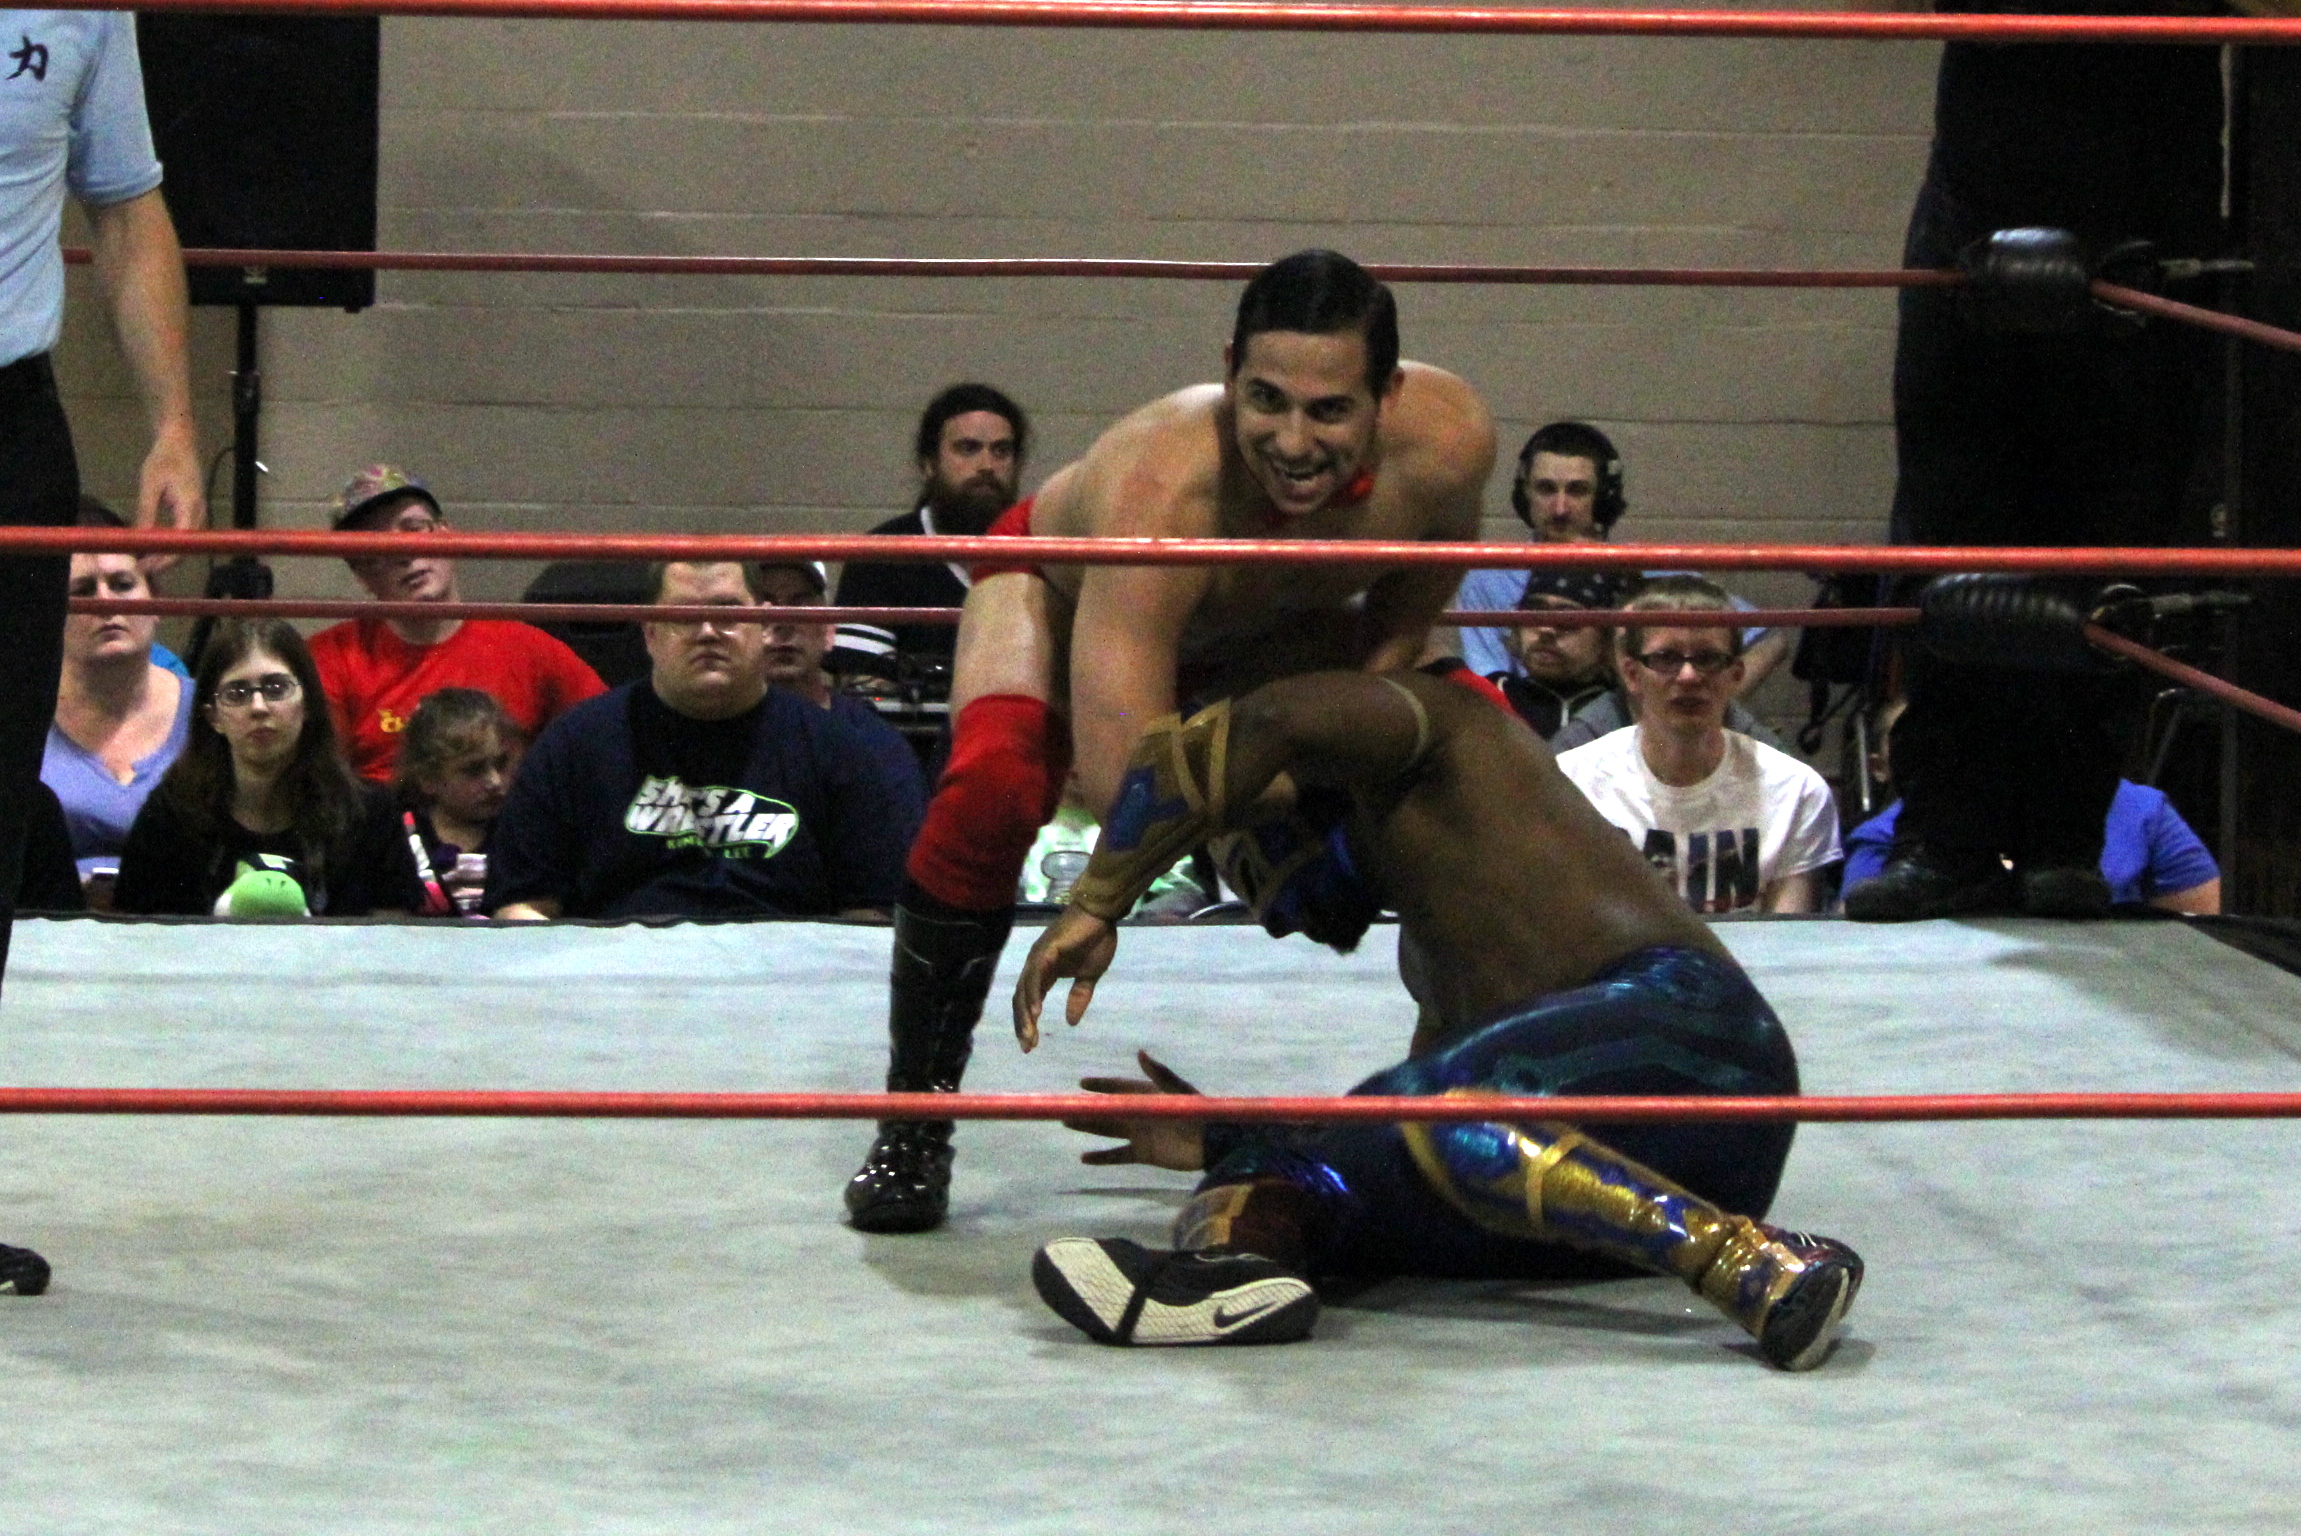 two wrestling wrestlers wrestle in the ring on their knees